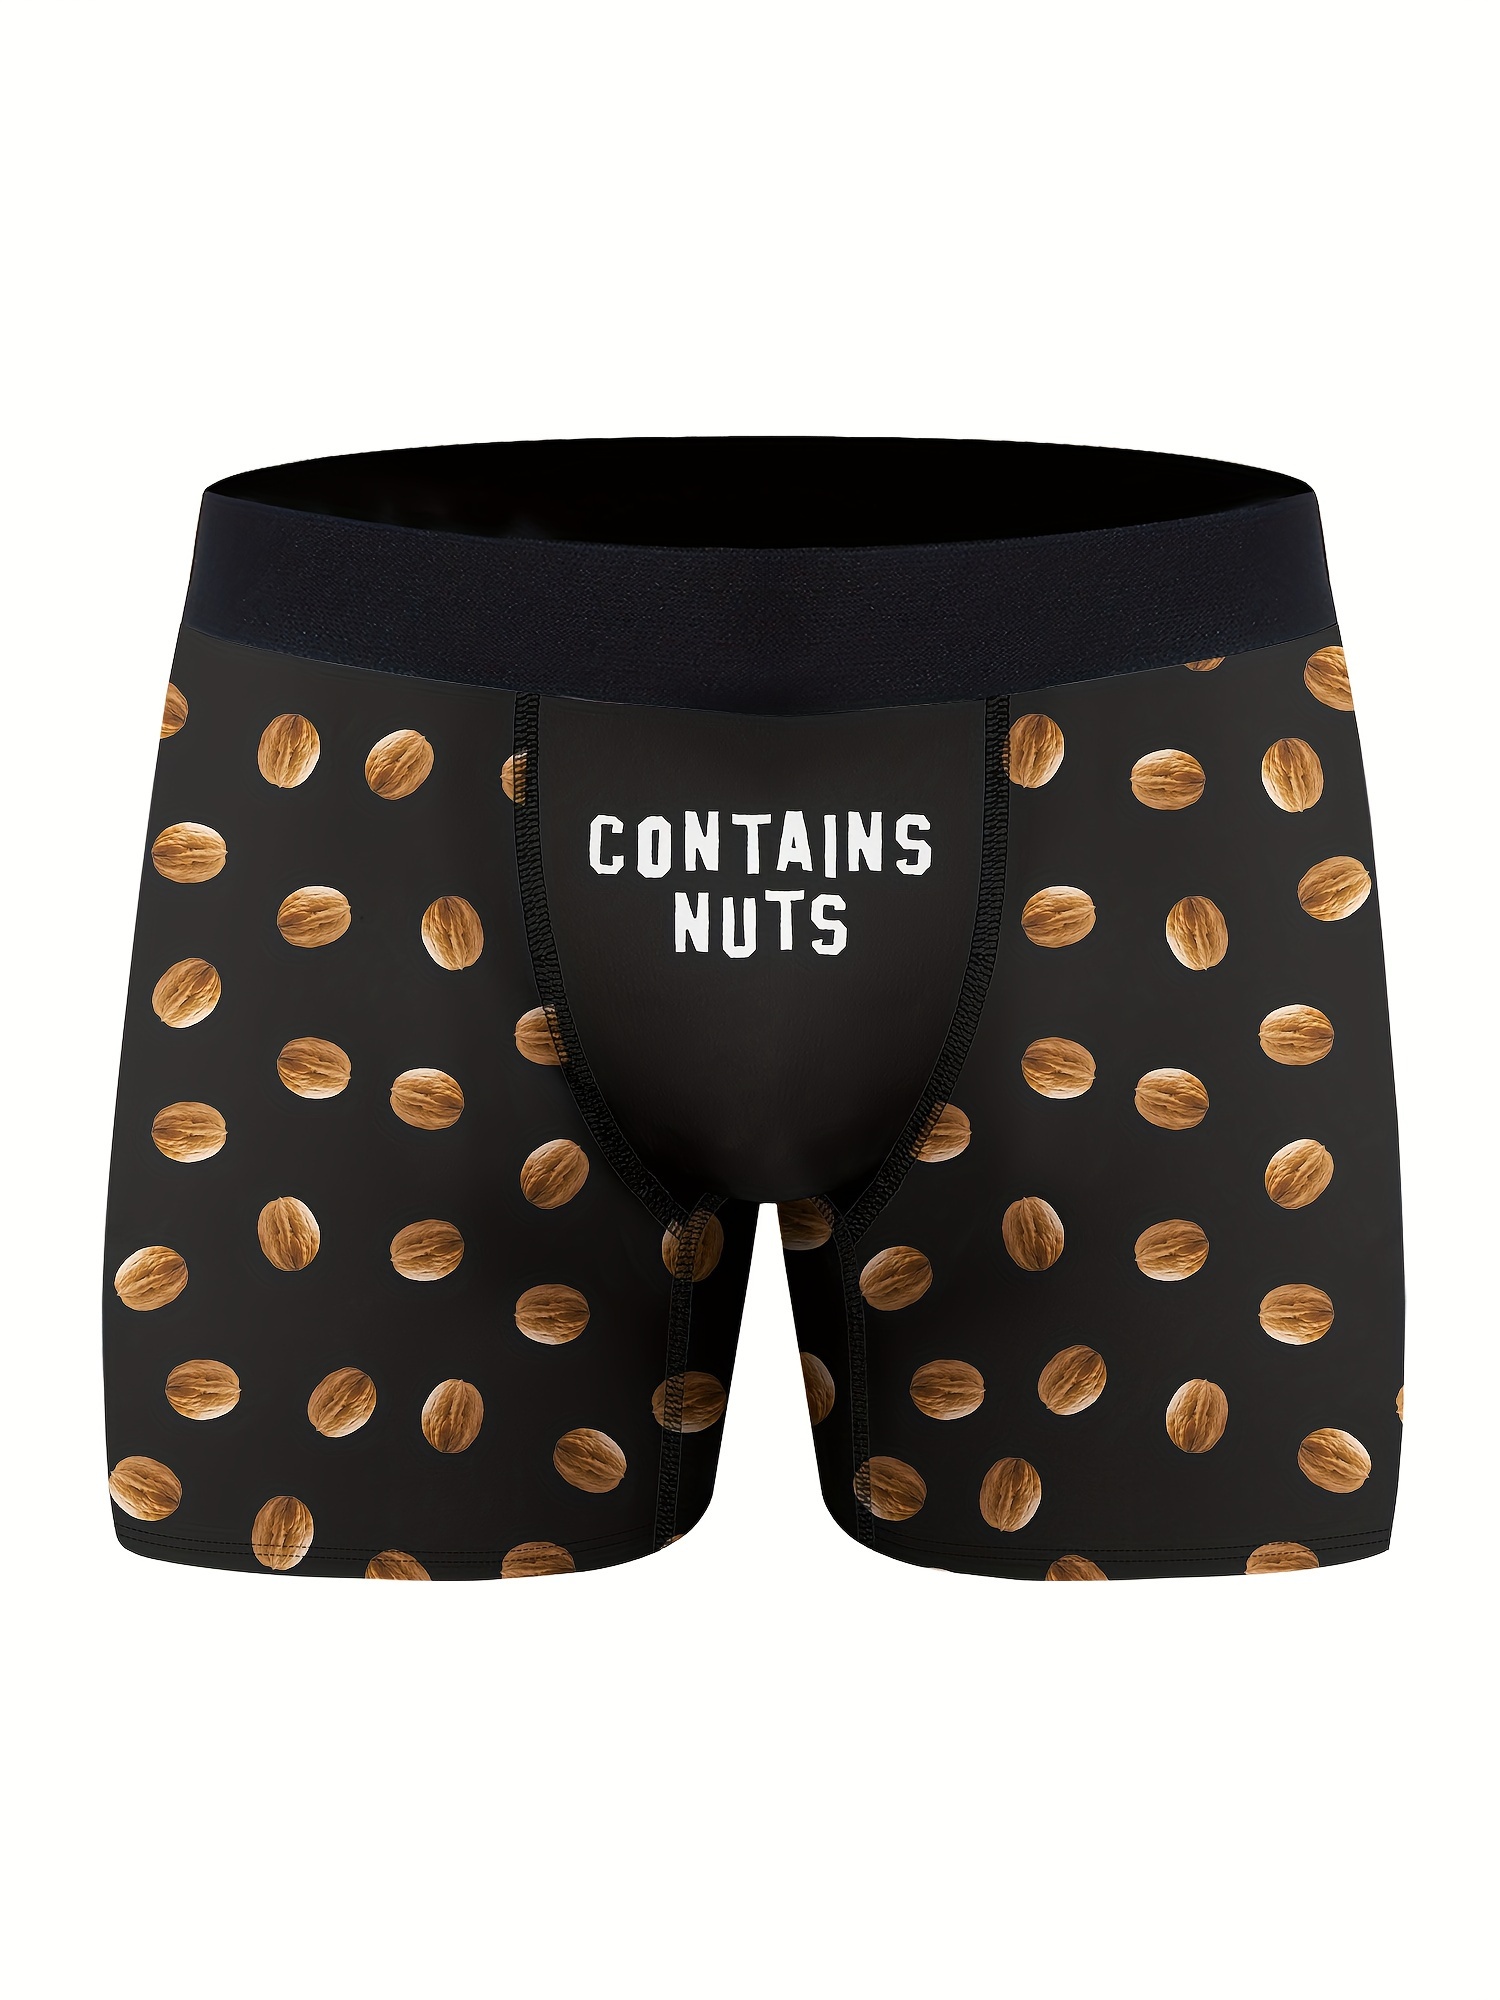 contains nuts print mens fashion novelty boxer briefs shorts breathable comfy high stretch boxer trunks mens underwear details 0